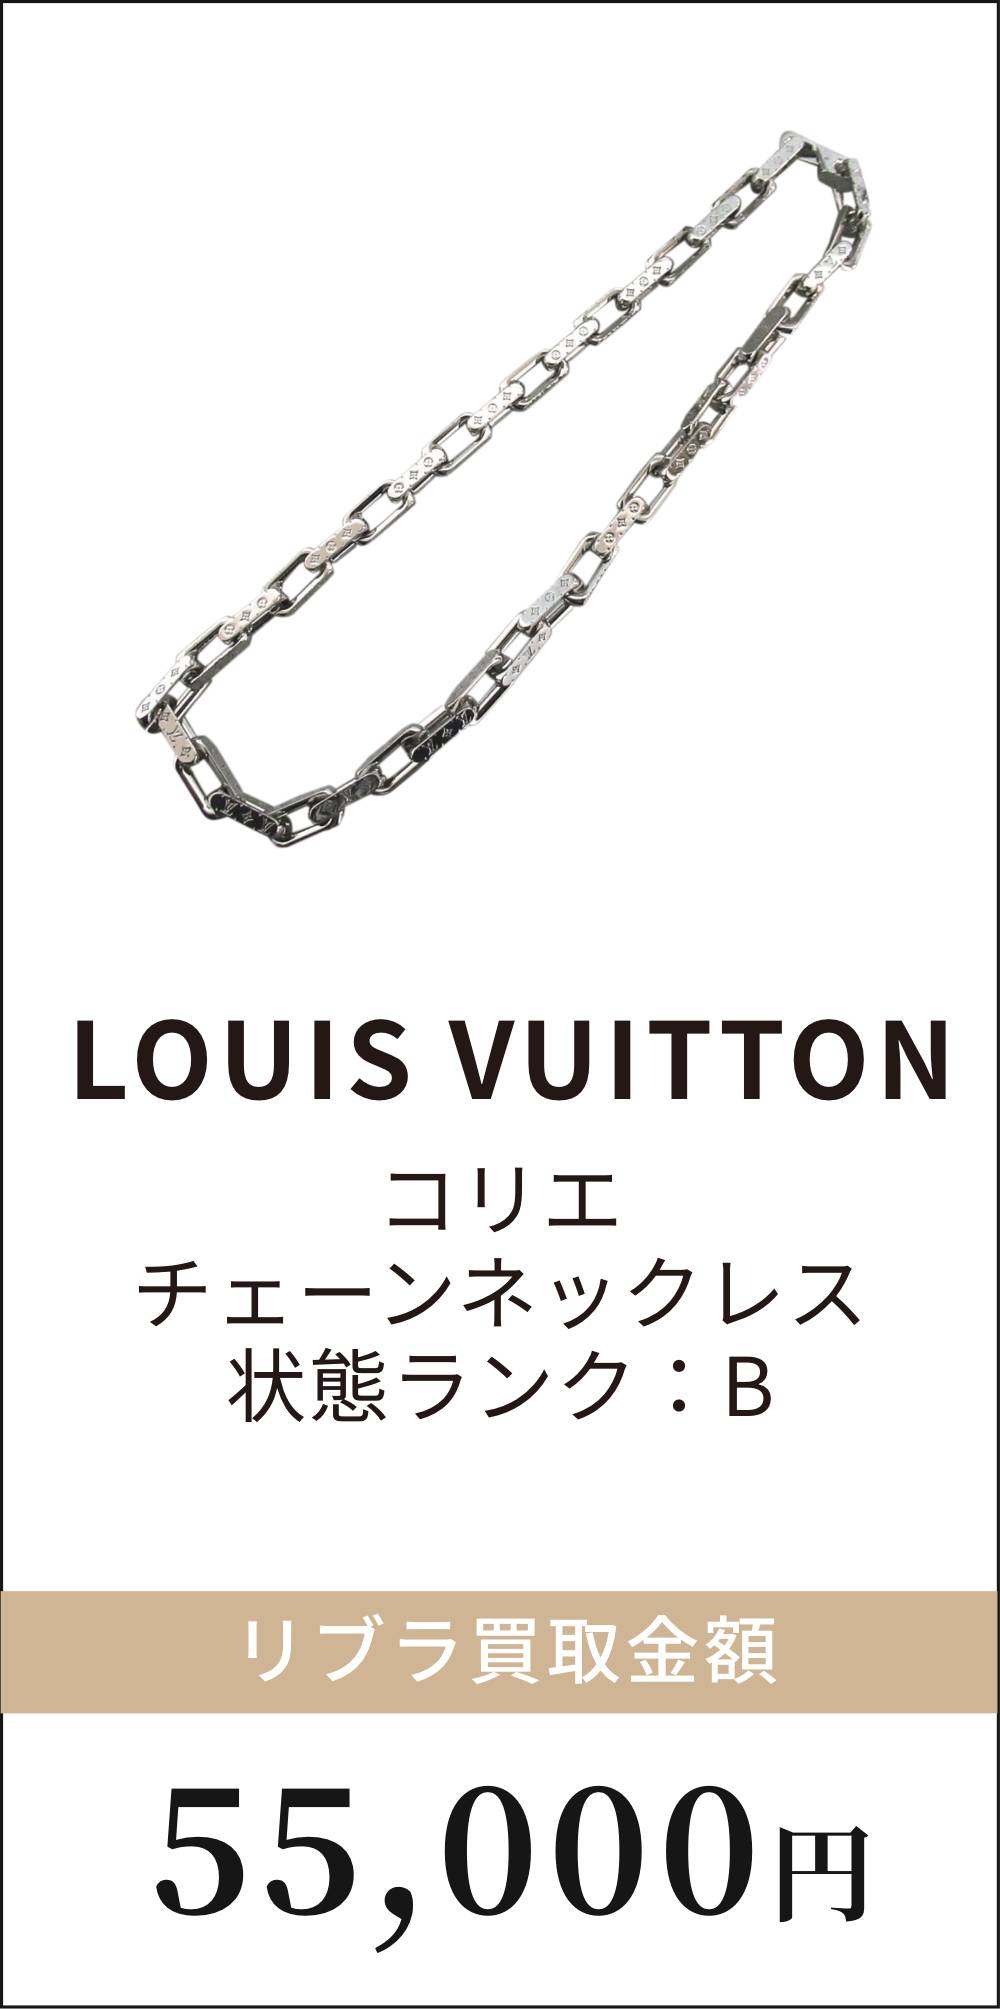 LOUIS VUITTON コリエ チェーンネックレス　買取例